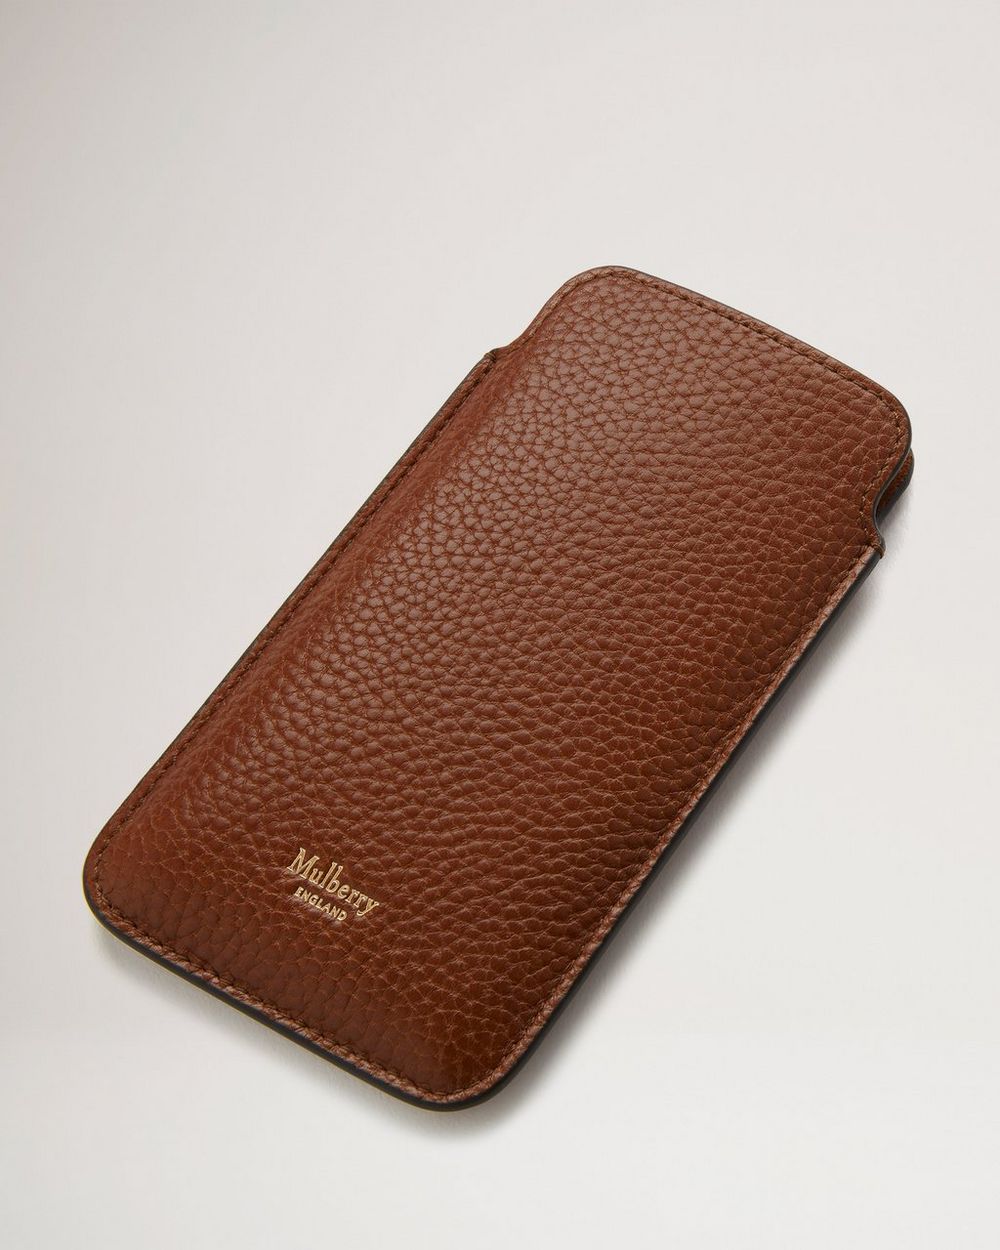 iPhone Cover | Oak Natural Grain Leather Curate Sales – New Arrivals Edit | Mulberry